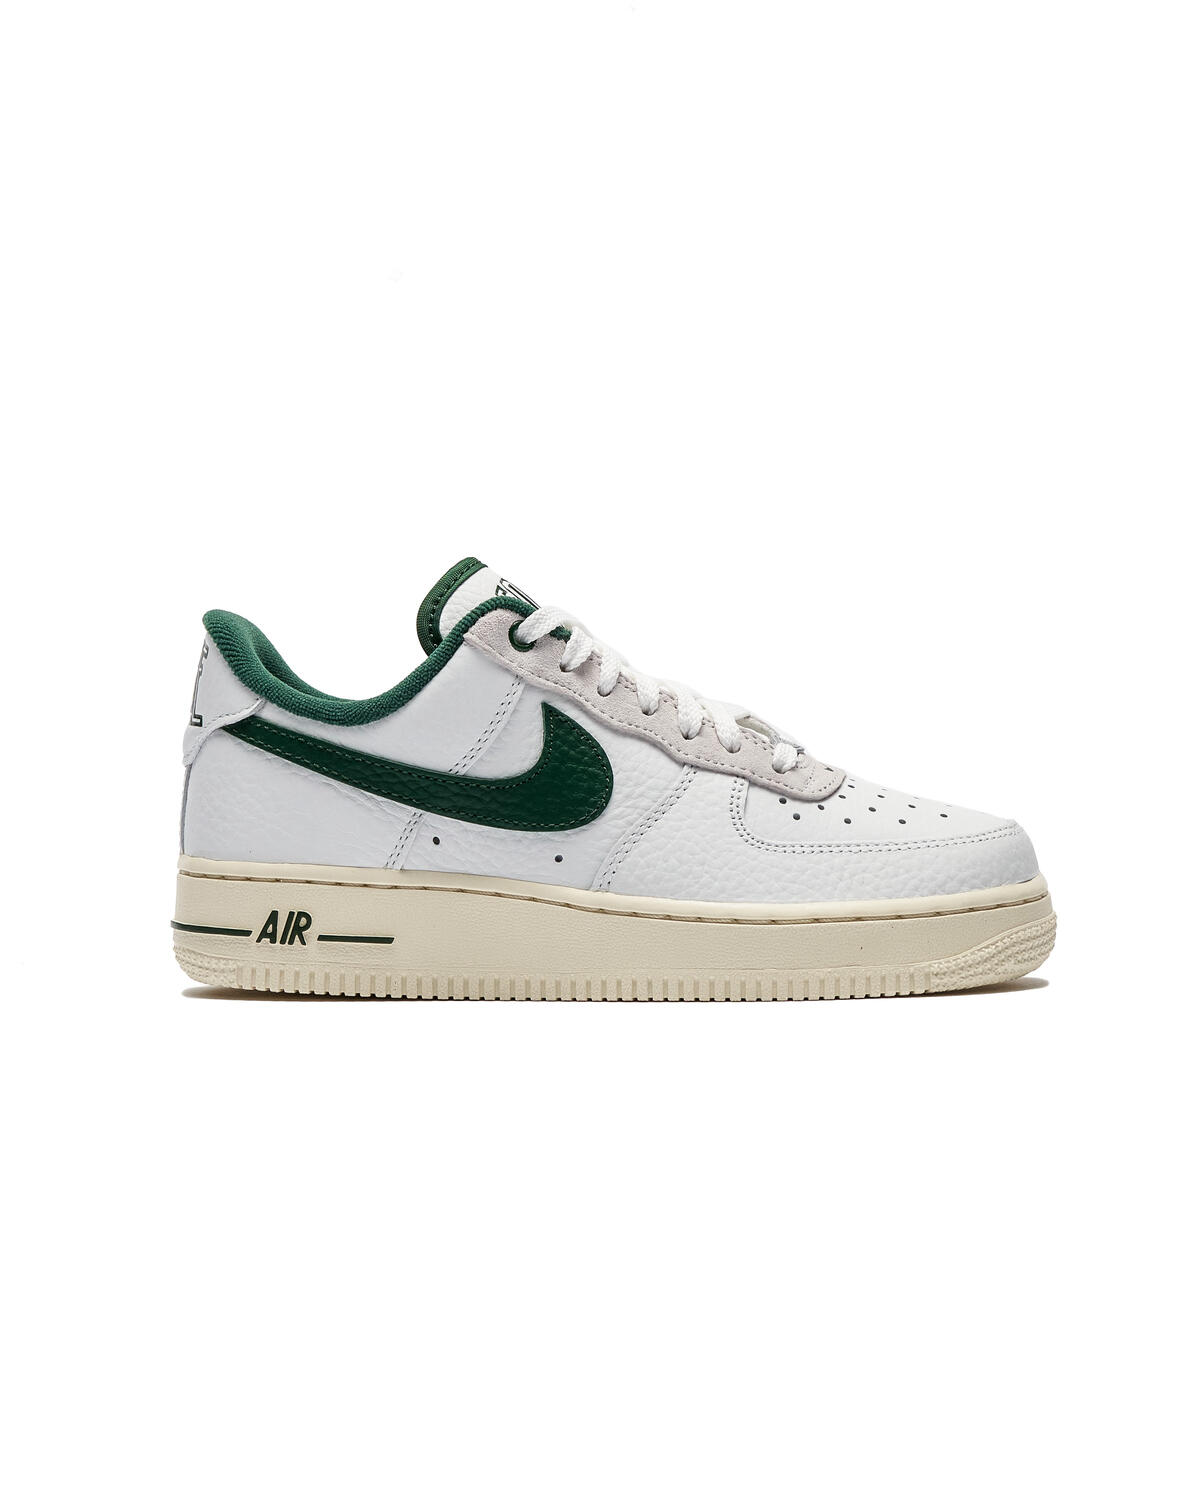 Nike Air Force 1 Low '07 LV8 X's and O's Summit White